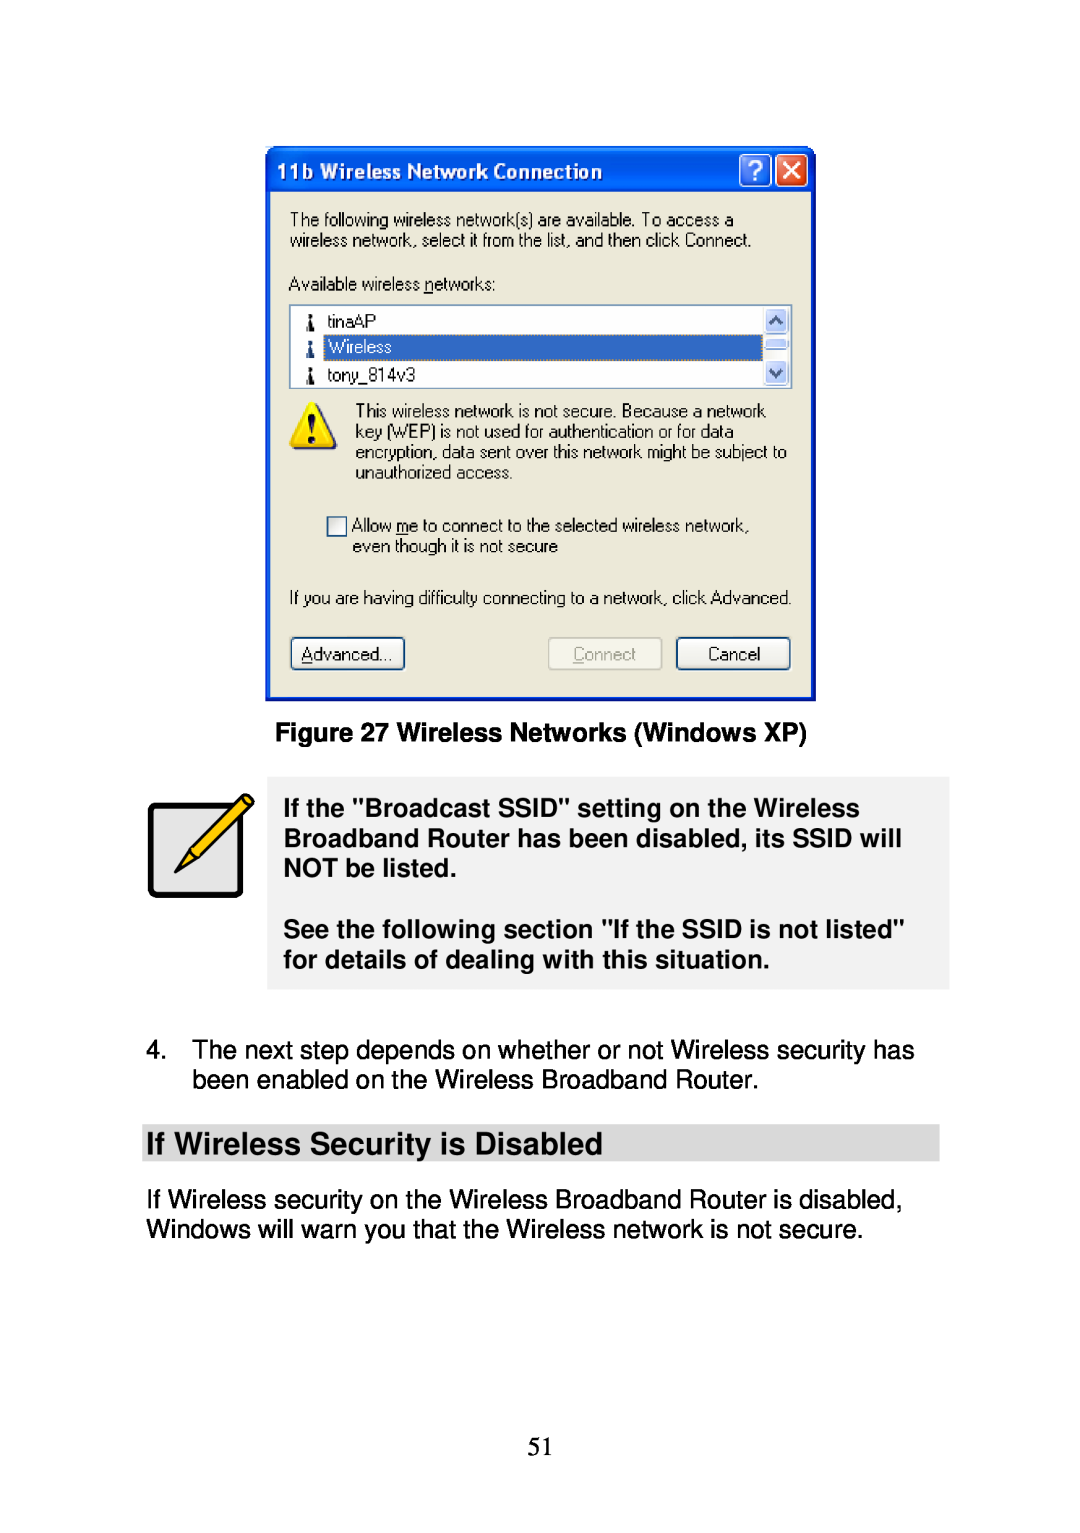 3Com WBR-6000 user manual If Wireless Security is Disabled, Wireless Networks Windows XP 